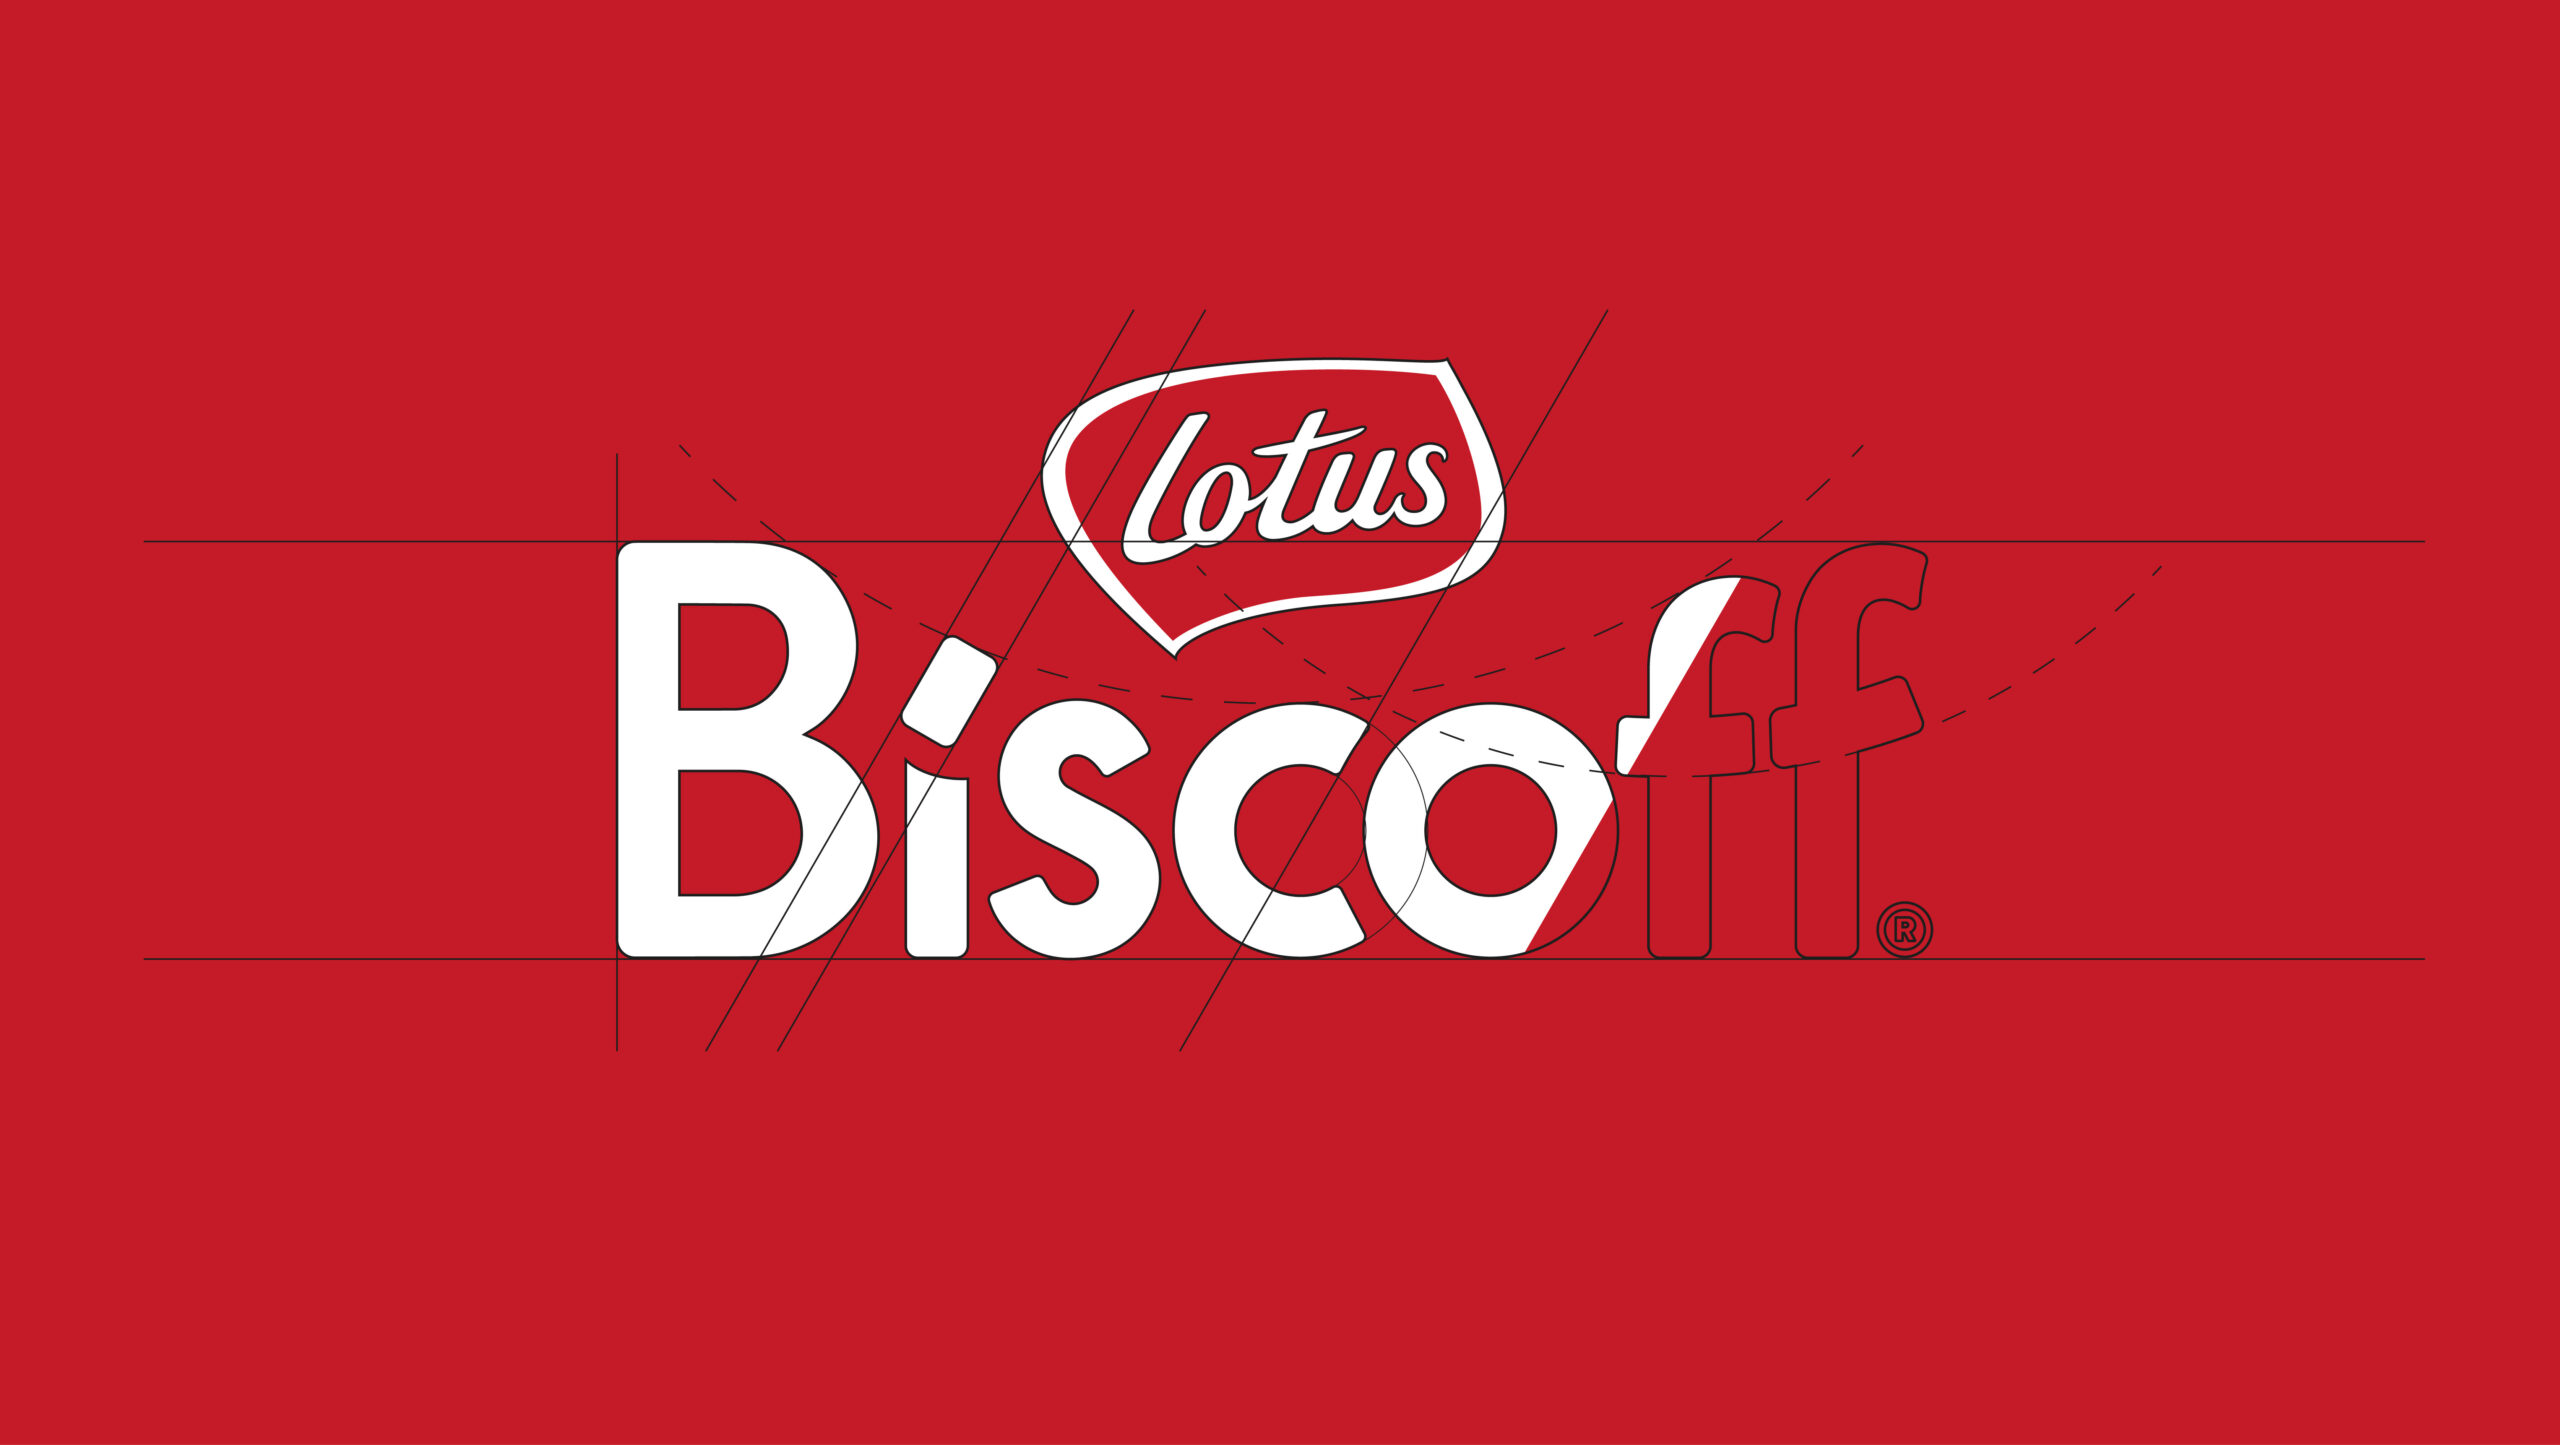 Lotus Biscoff Unveils New Global Brand Identity and Packaging Design by BrandMe